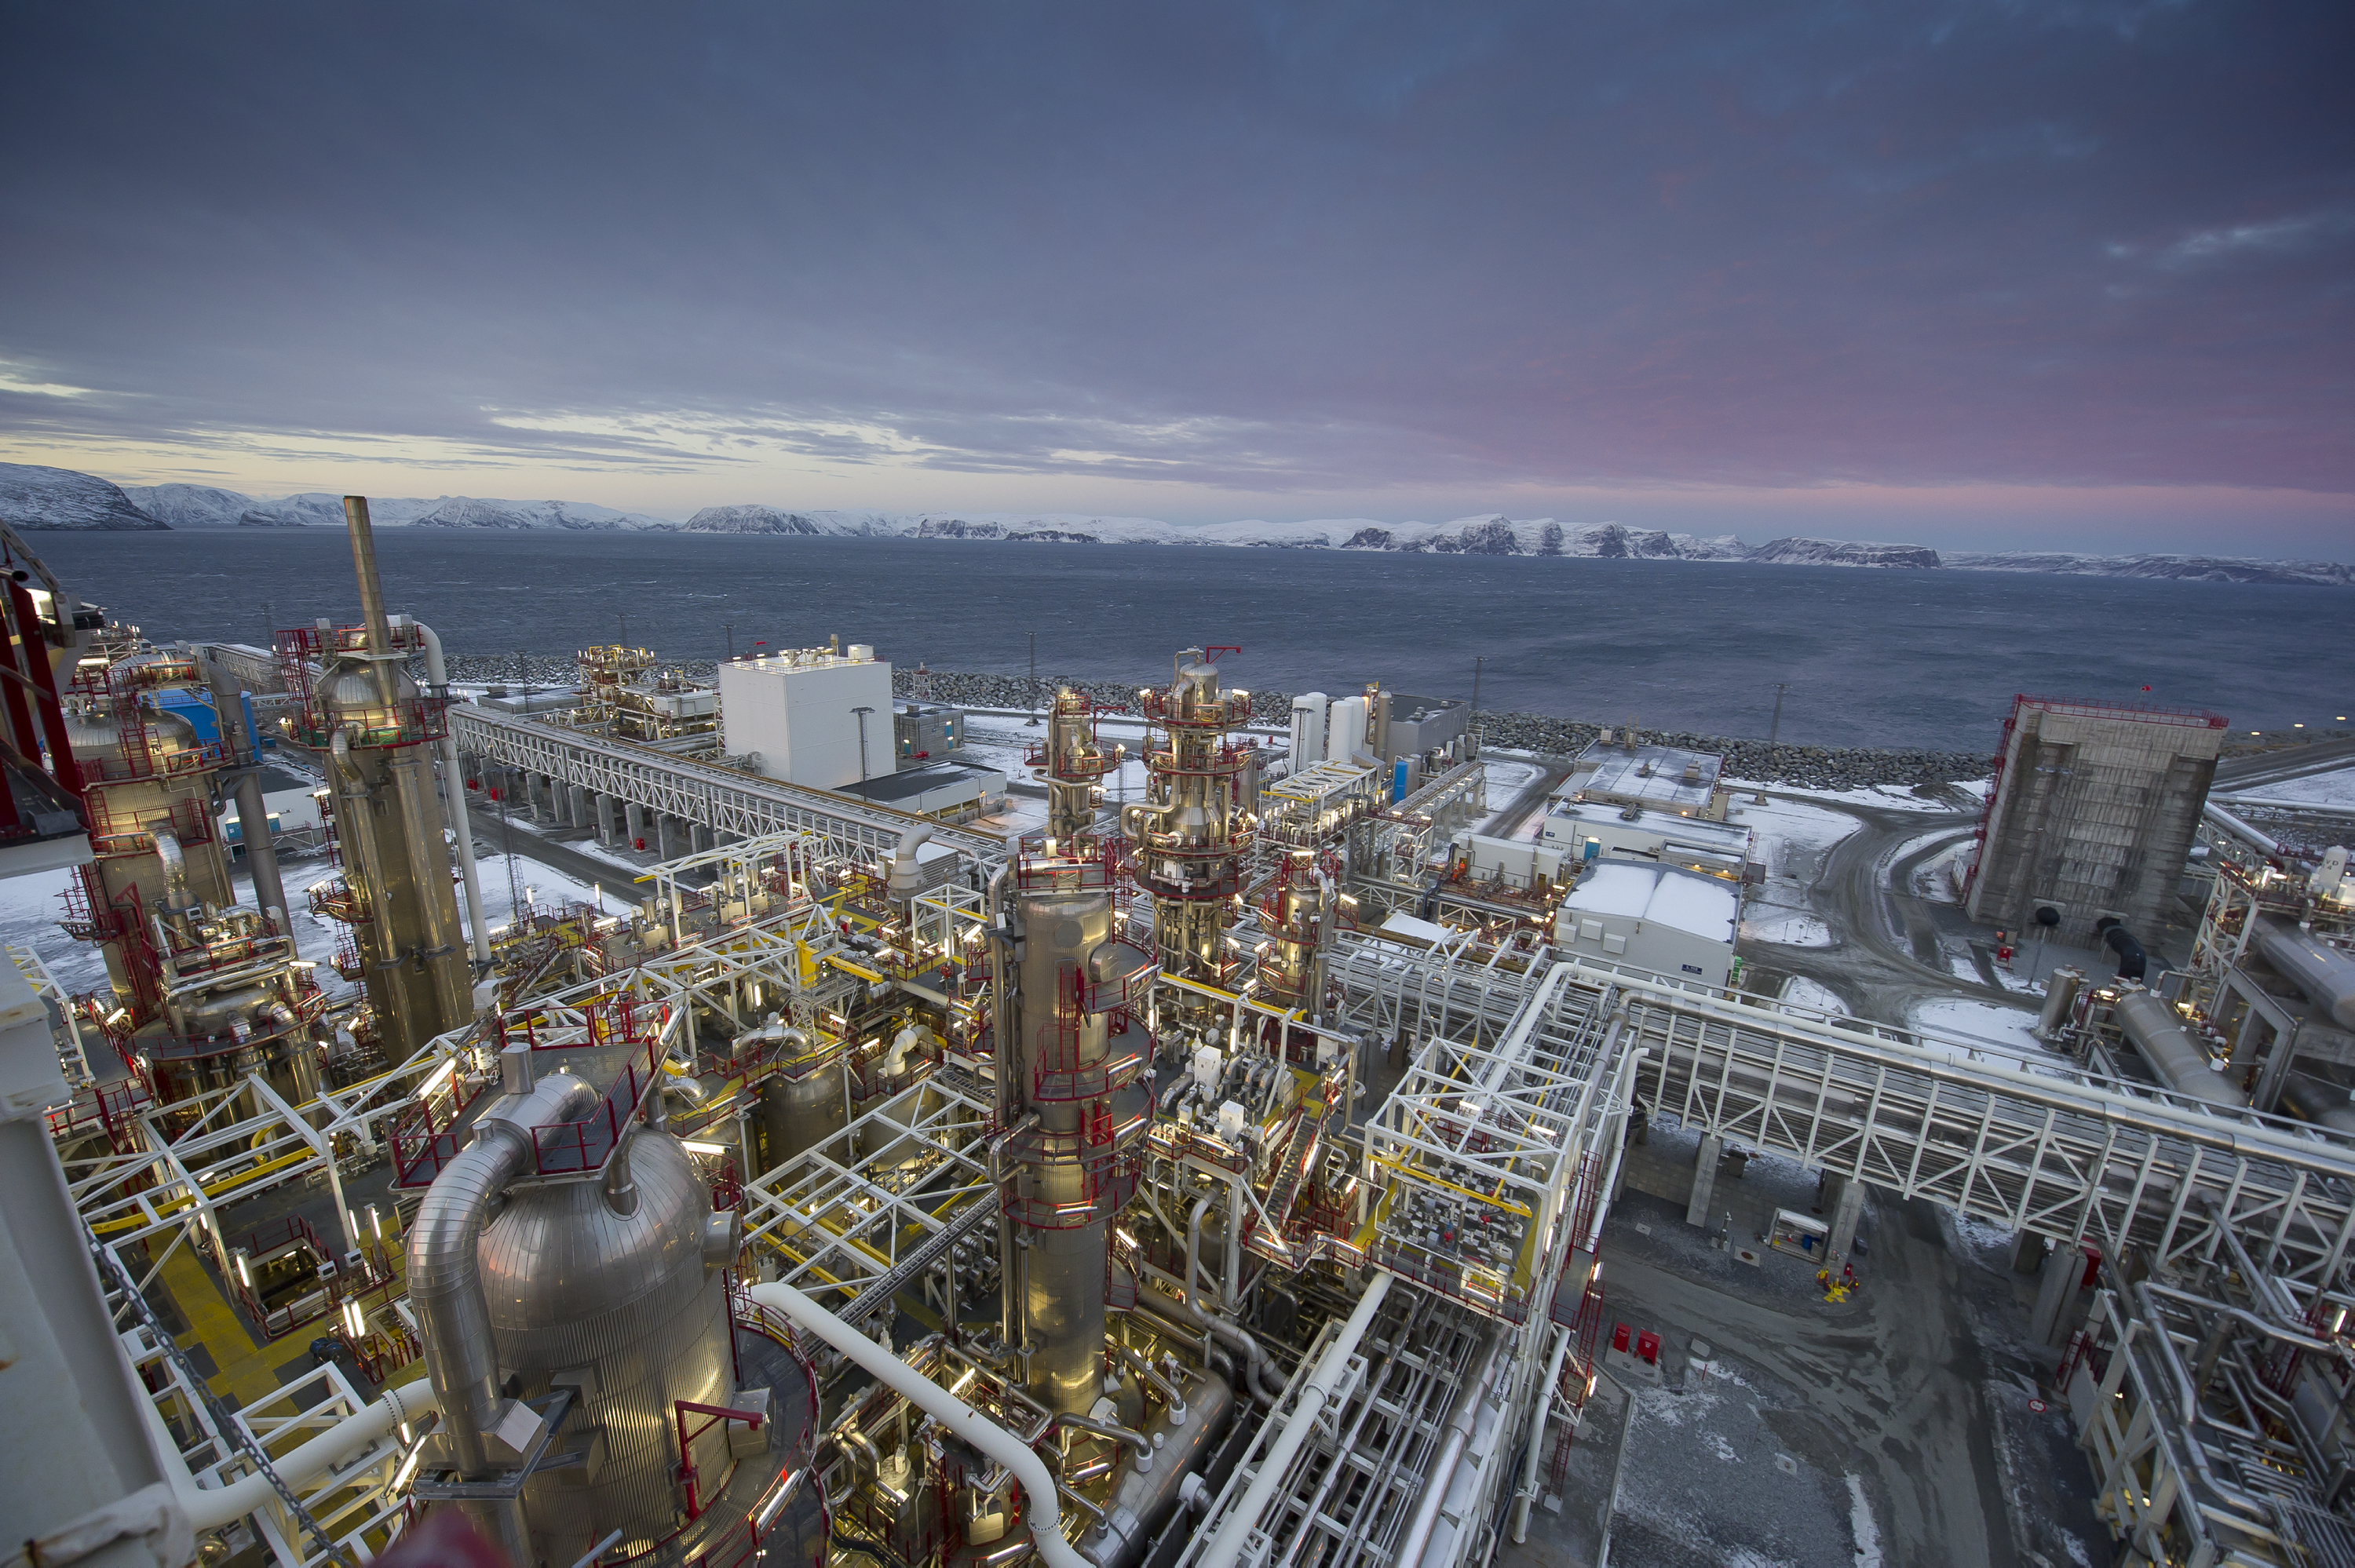 Picture of the LNG plant at Melkøya